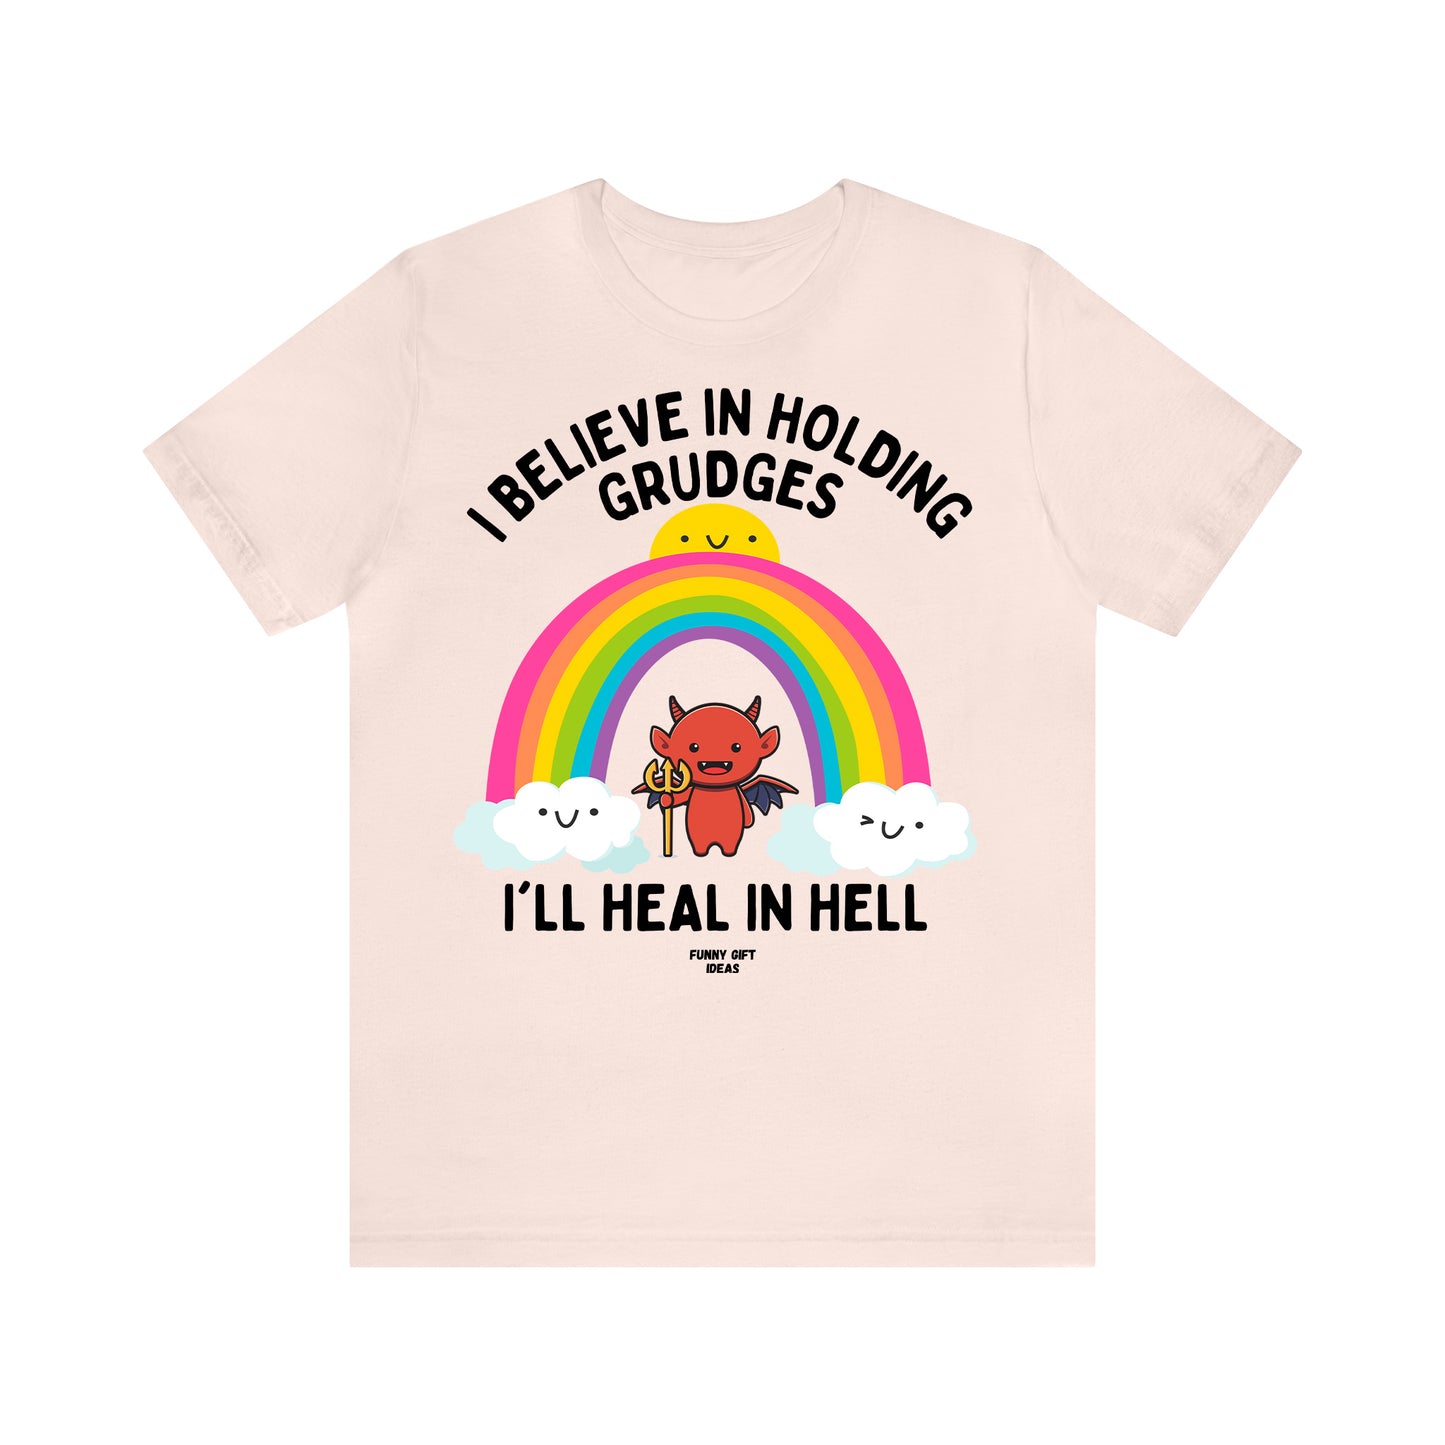 Funny Shirts for Women - I Believe in Holding Grudges I'll Heal in Hell - Women's T Shirts